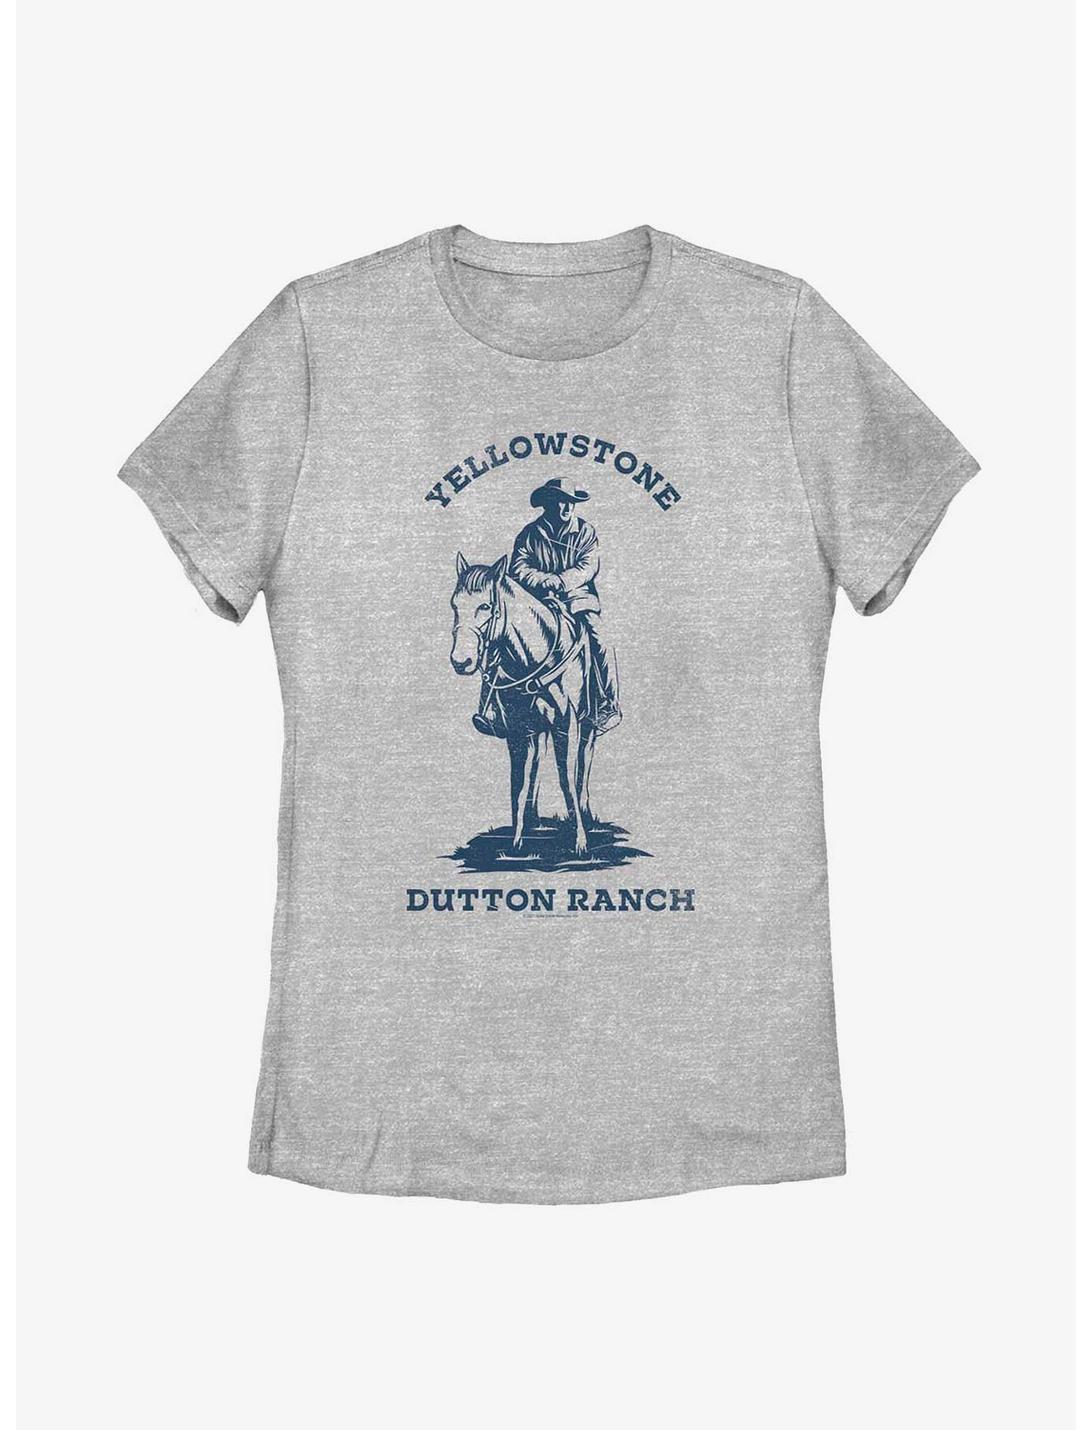 Yellowstone Dutton Ranch Distressed Womens T-Shirt, ATH HTR, hi-res